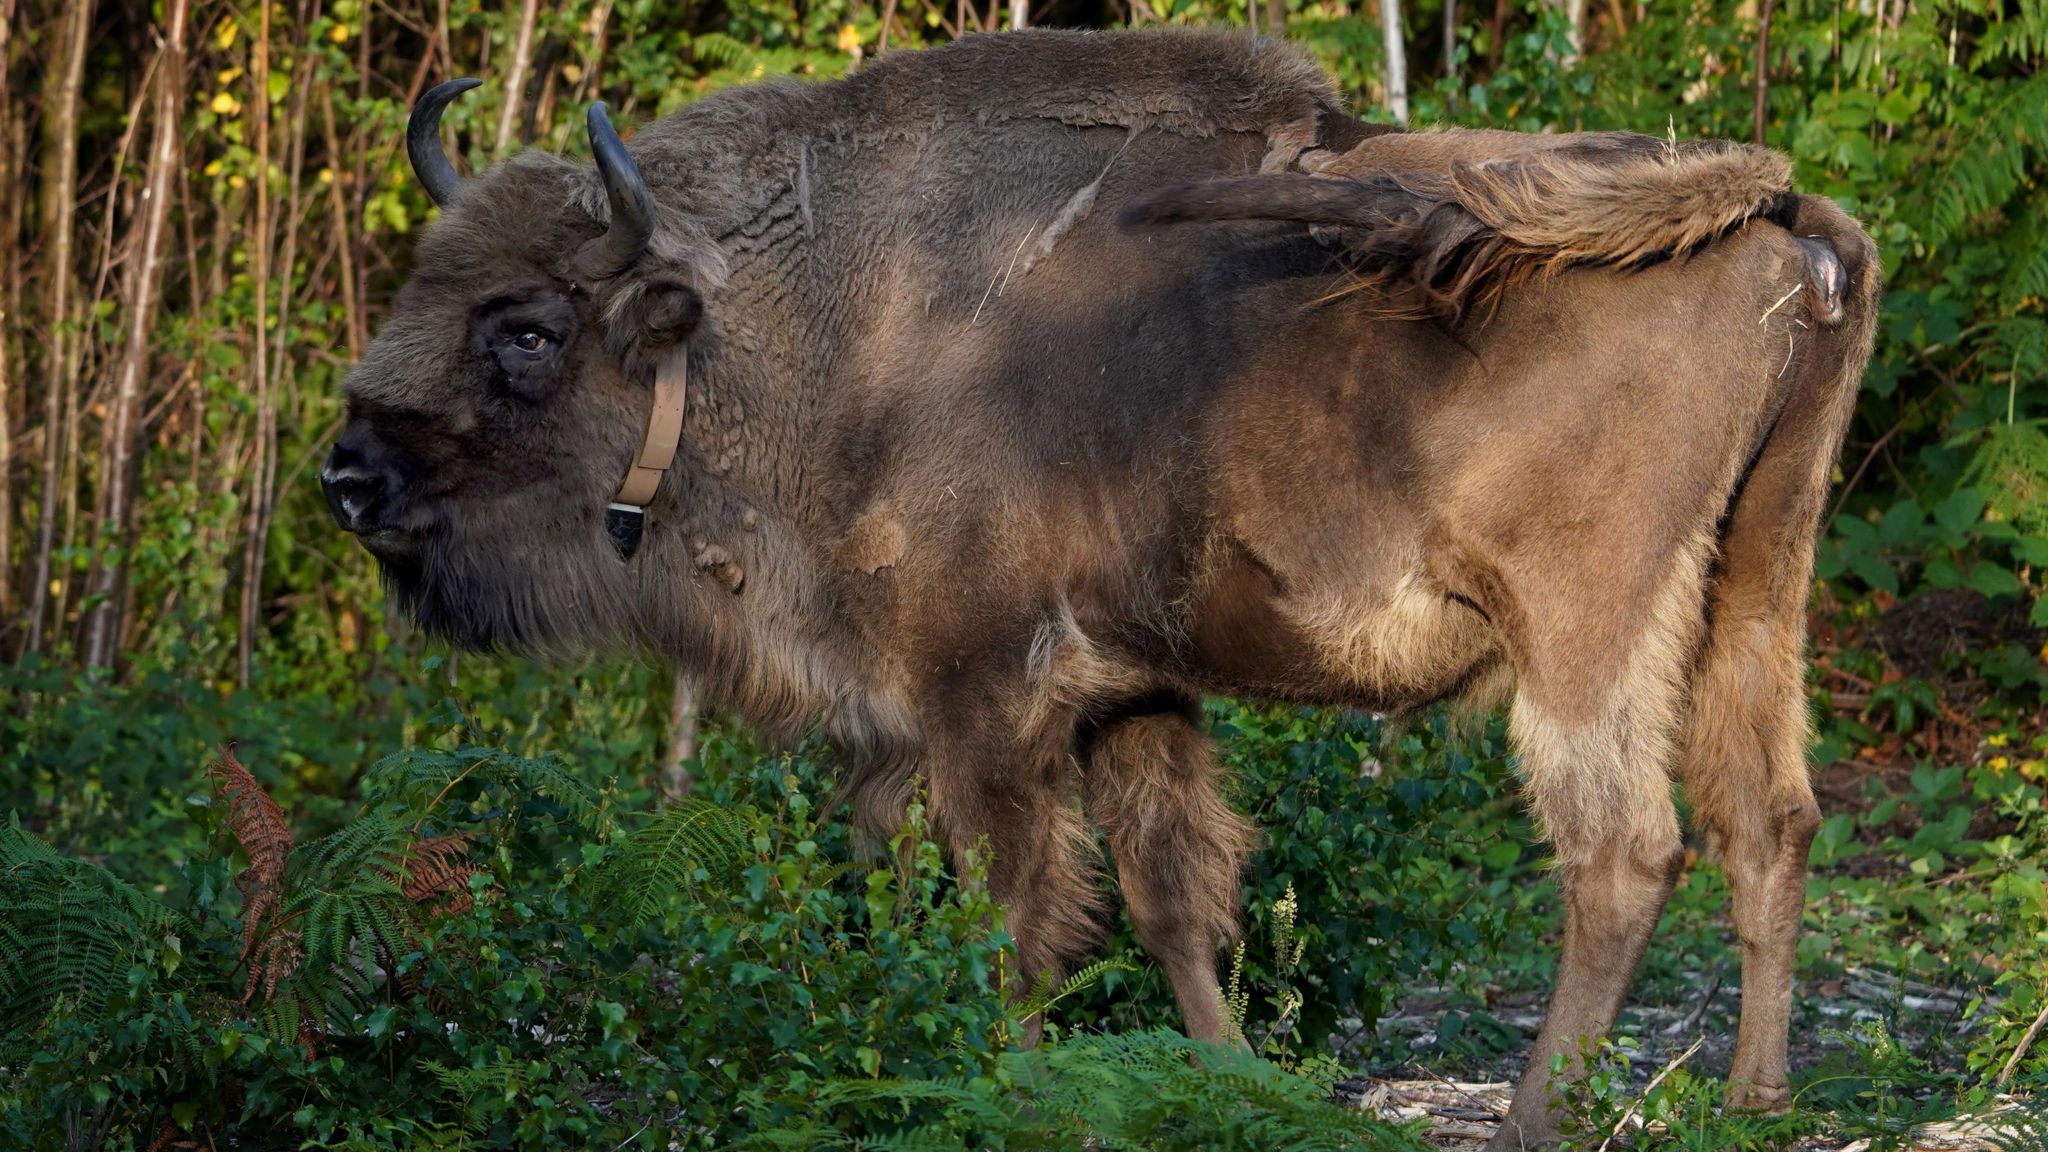 A large bison in woodland